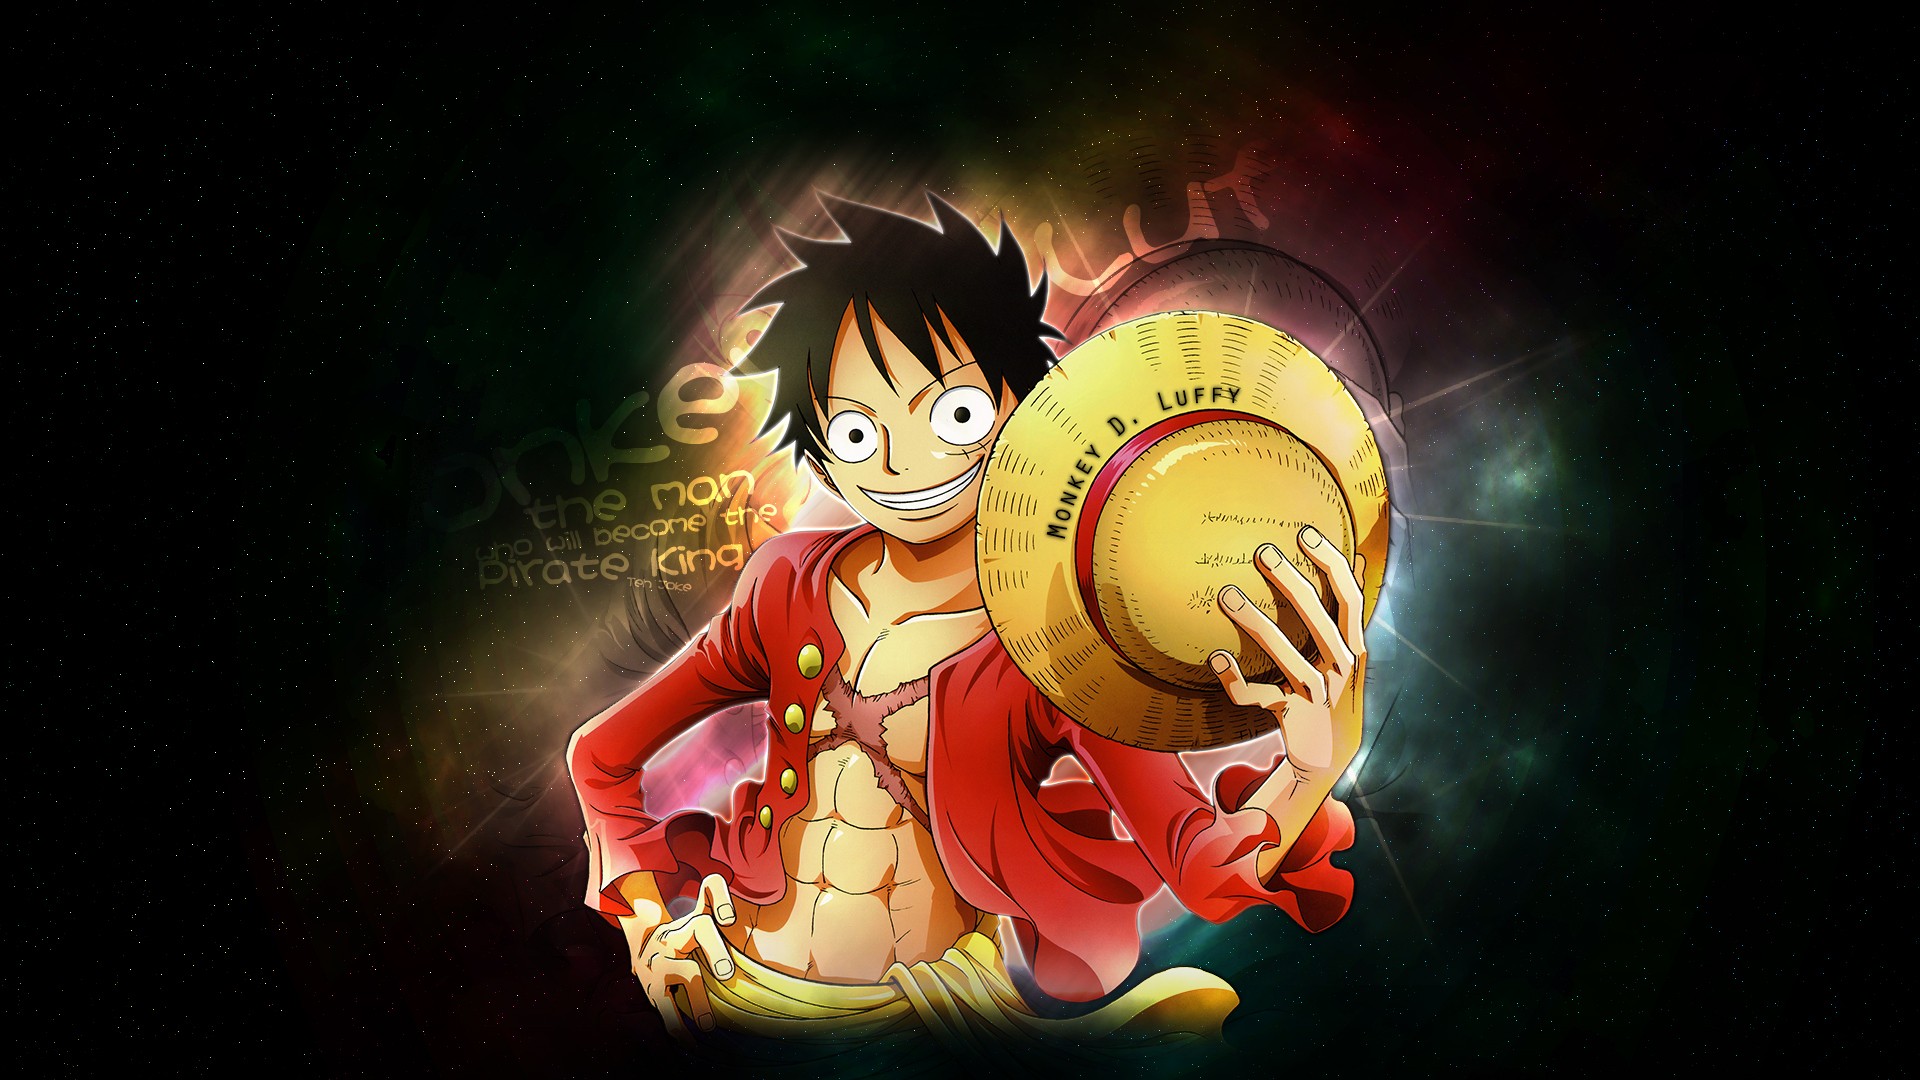 One Piece Luffy Wallpaper Download HD 10823   HD Wallpapers Site 1920x1080